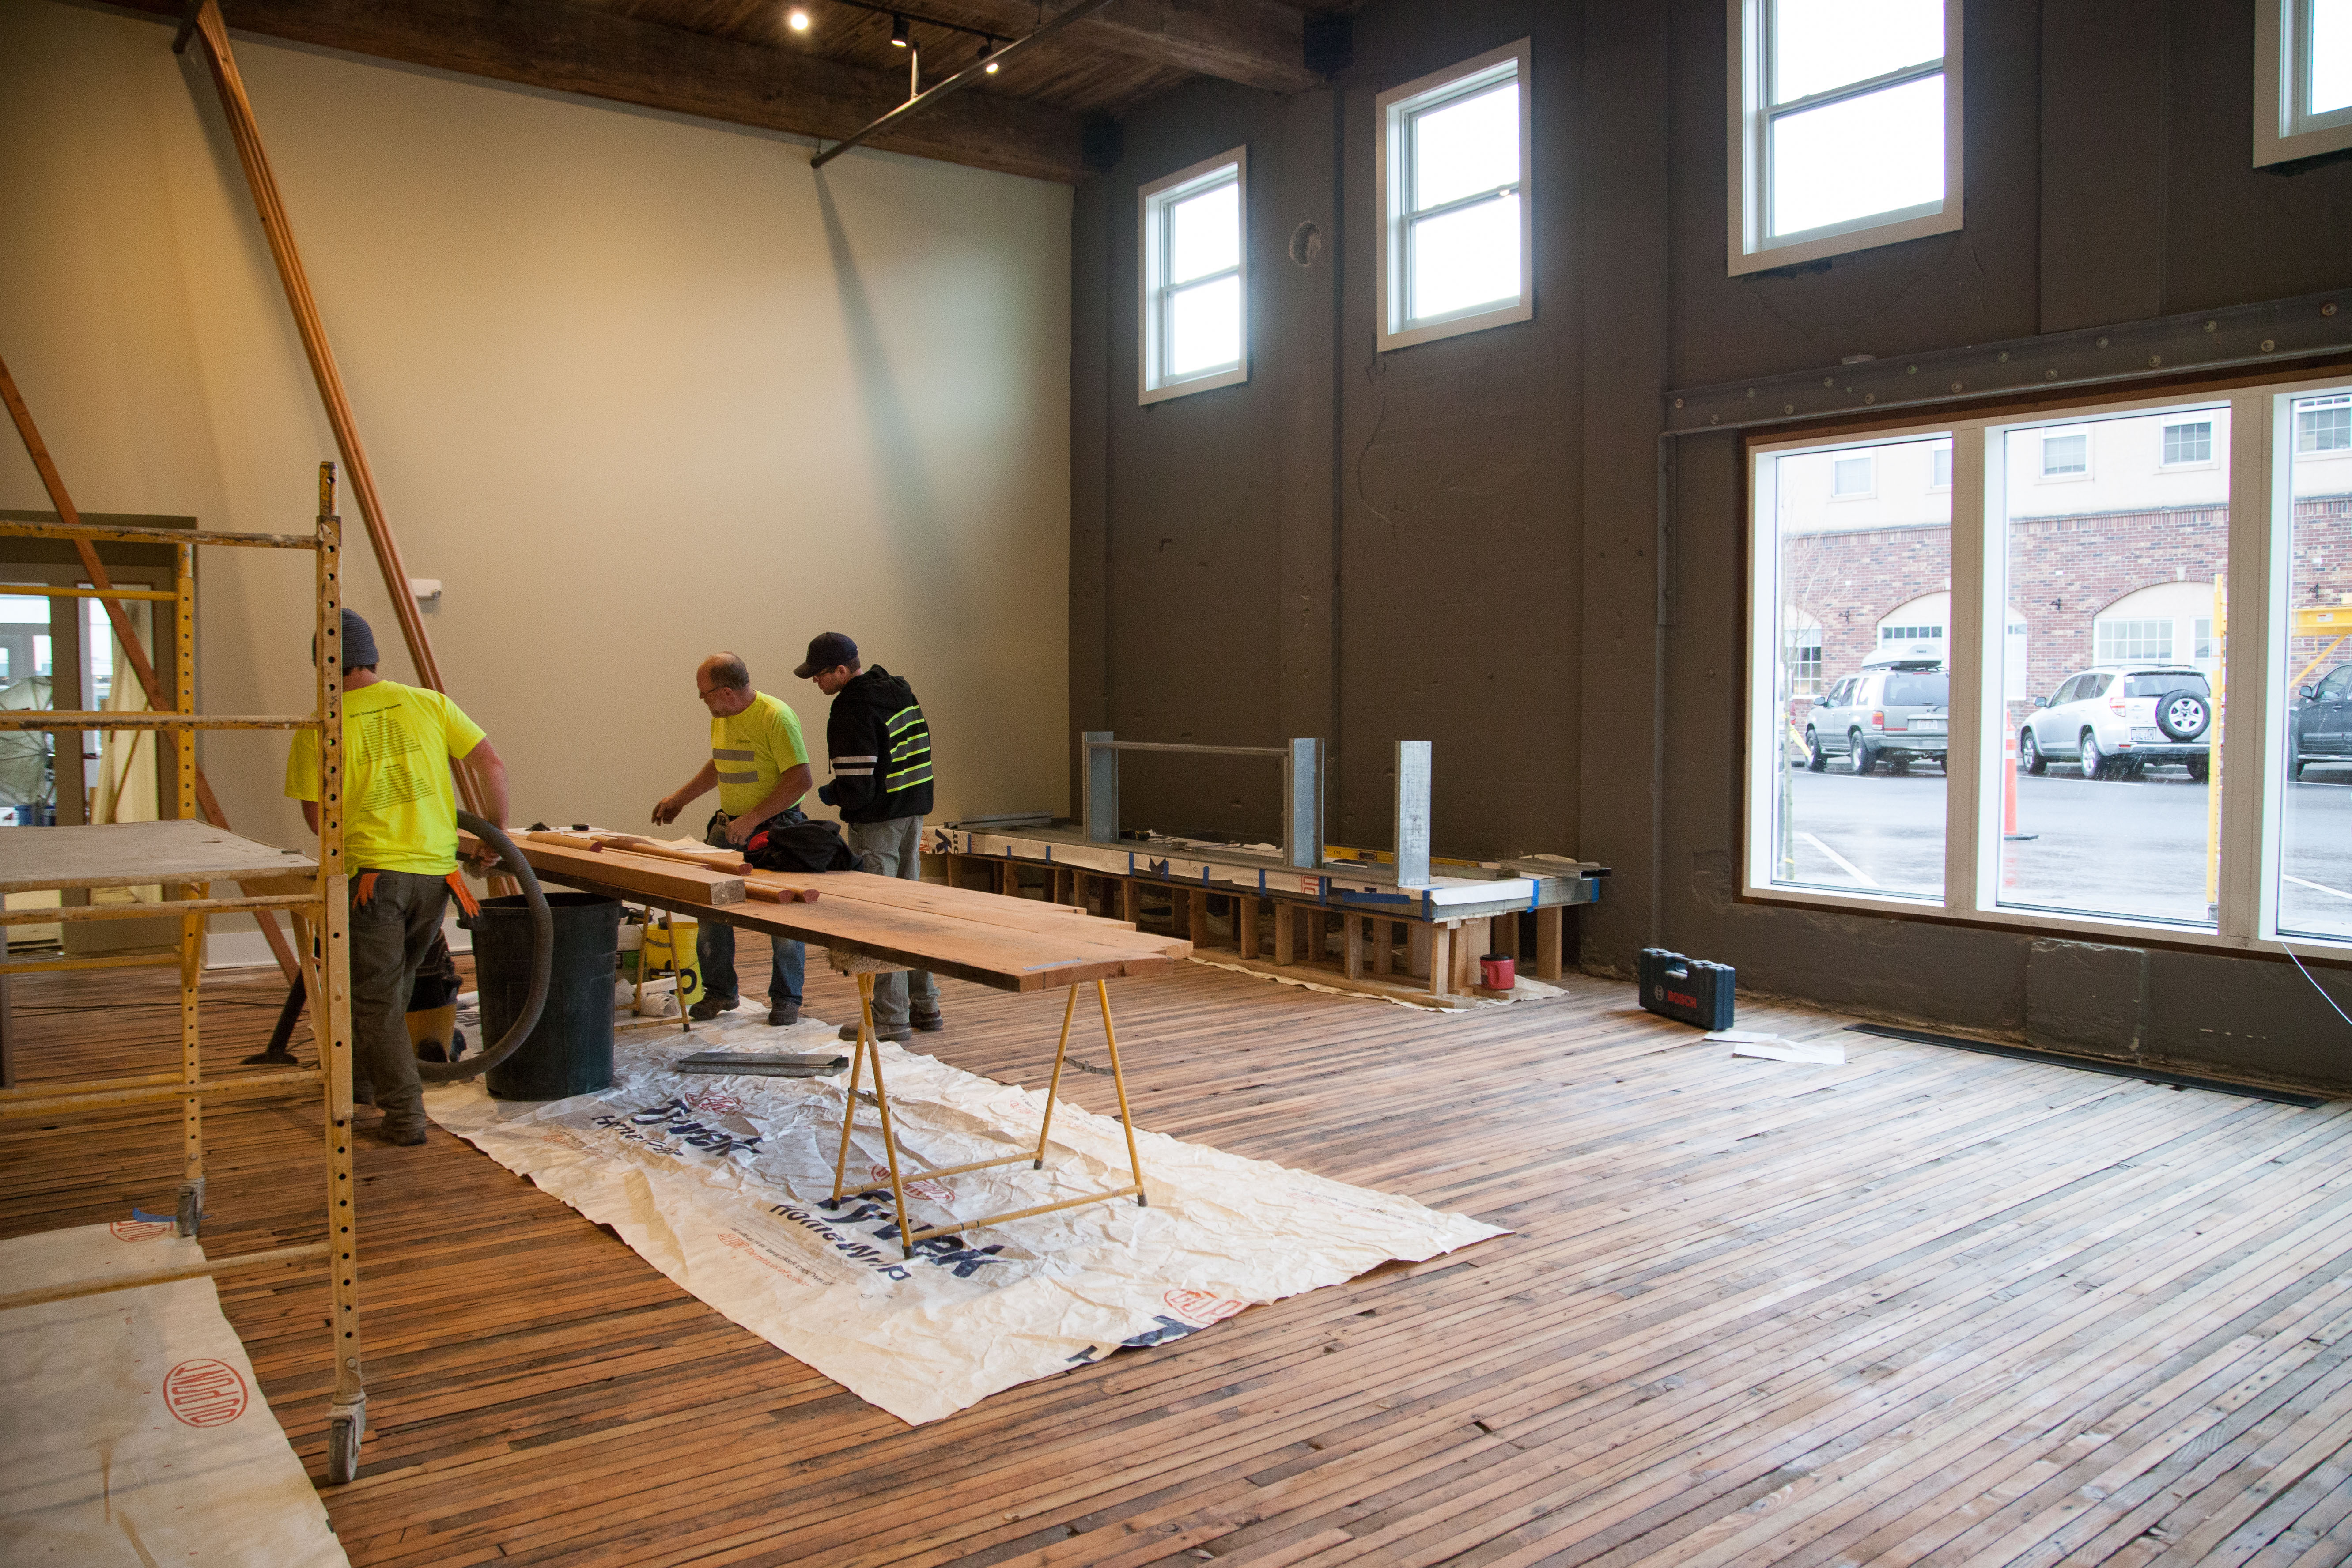 Contractors hard at work on the Inn at Lynden lobby space in the week before opening